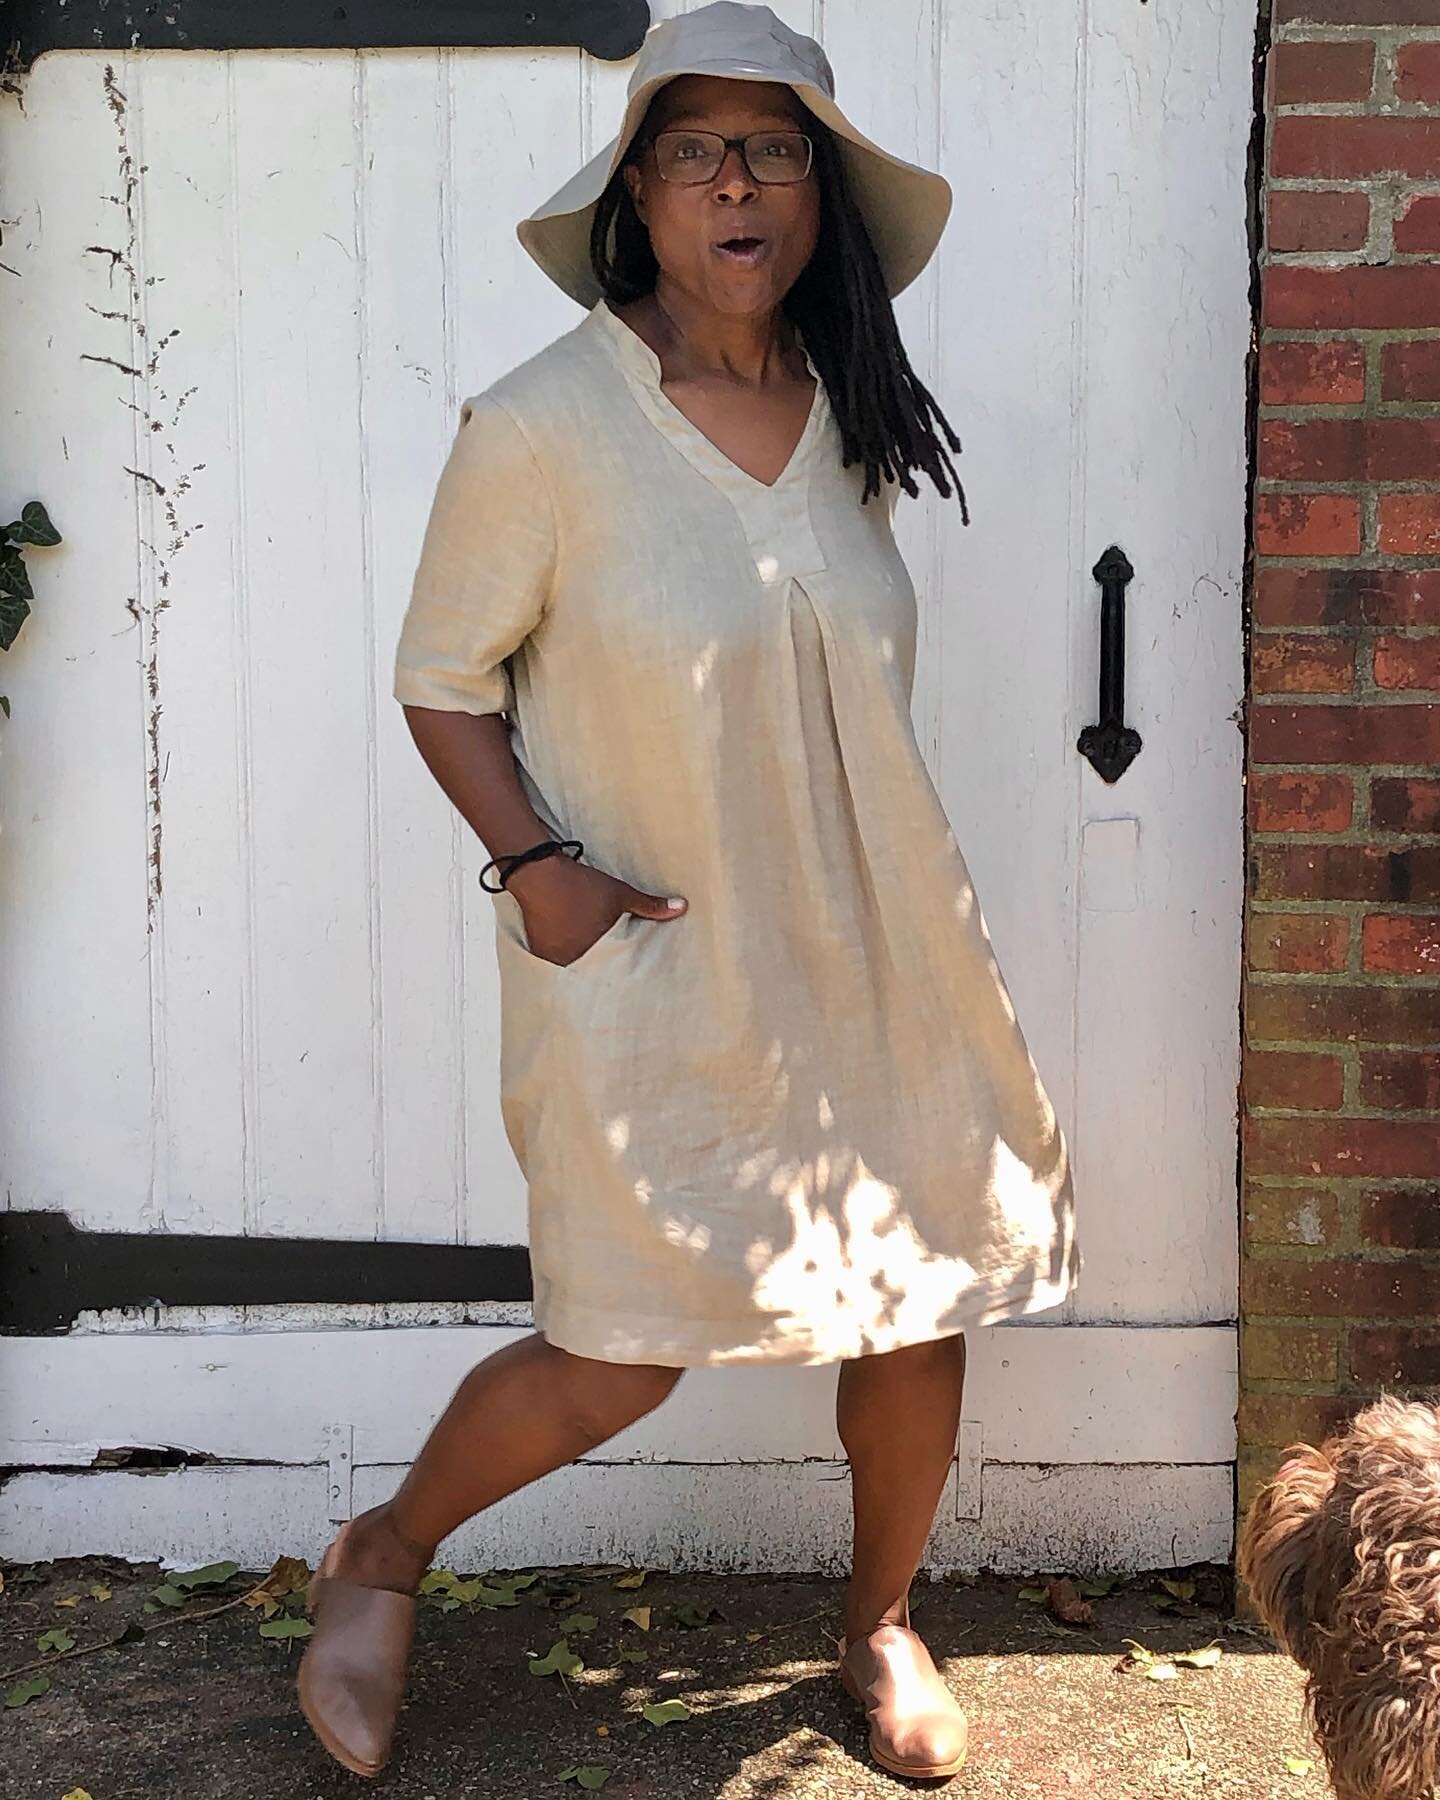 Caught in one of our new arrivals &mdash; the Jackie Dress. Indy-approved and with side pockets of course! A great staple that plays well with the Loge Hat. More new arrivals online now and more rolling out this week🍃
.
.
.

#ethicalfashion #slowfas